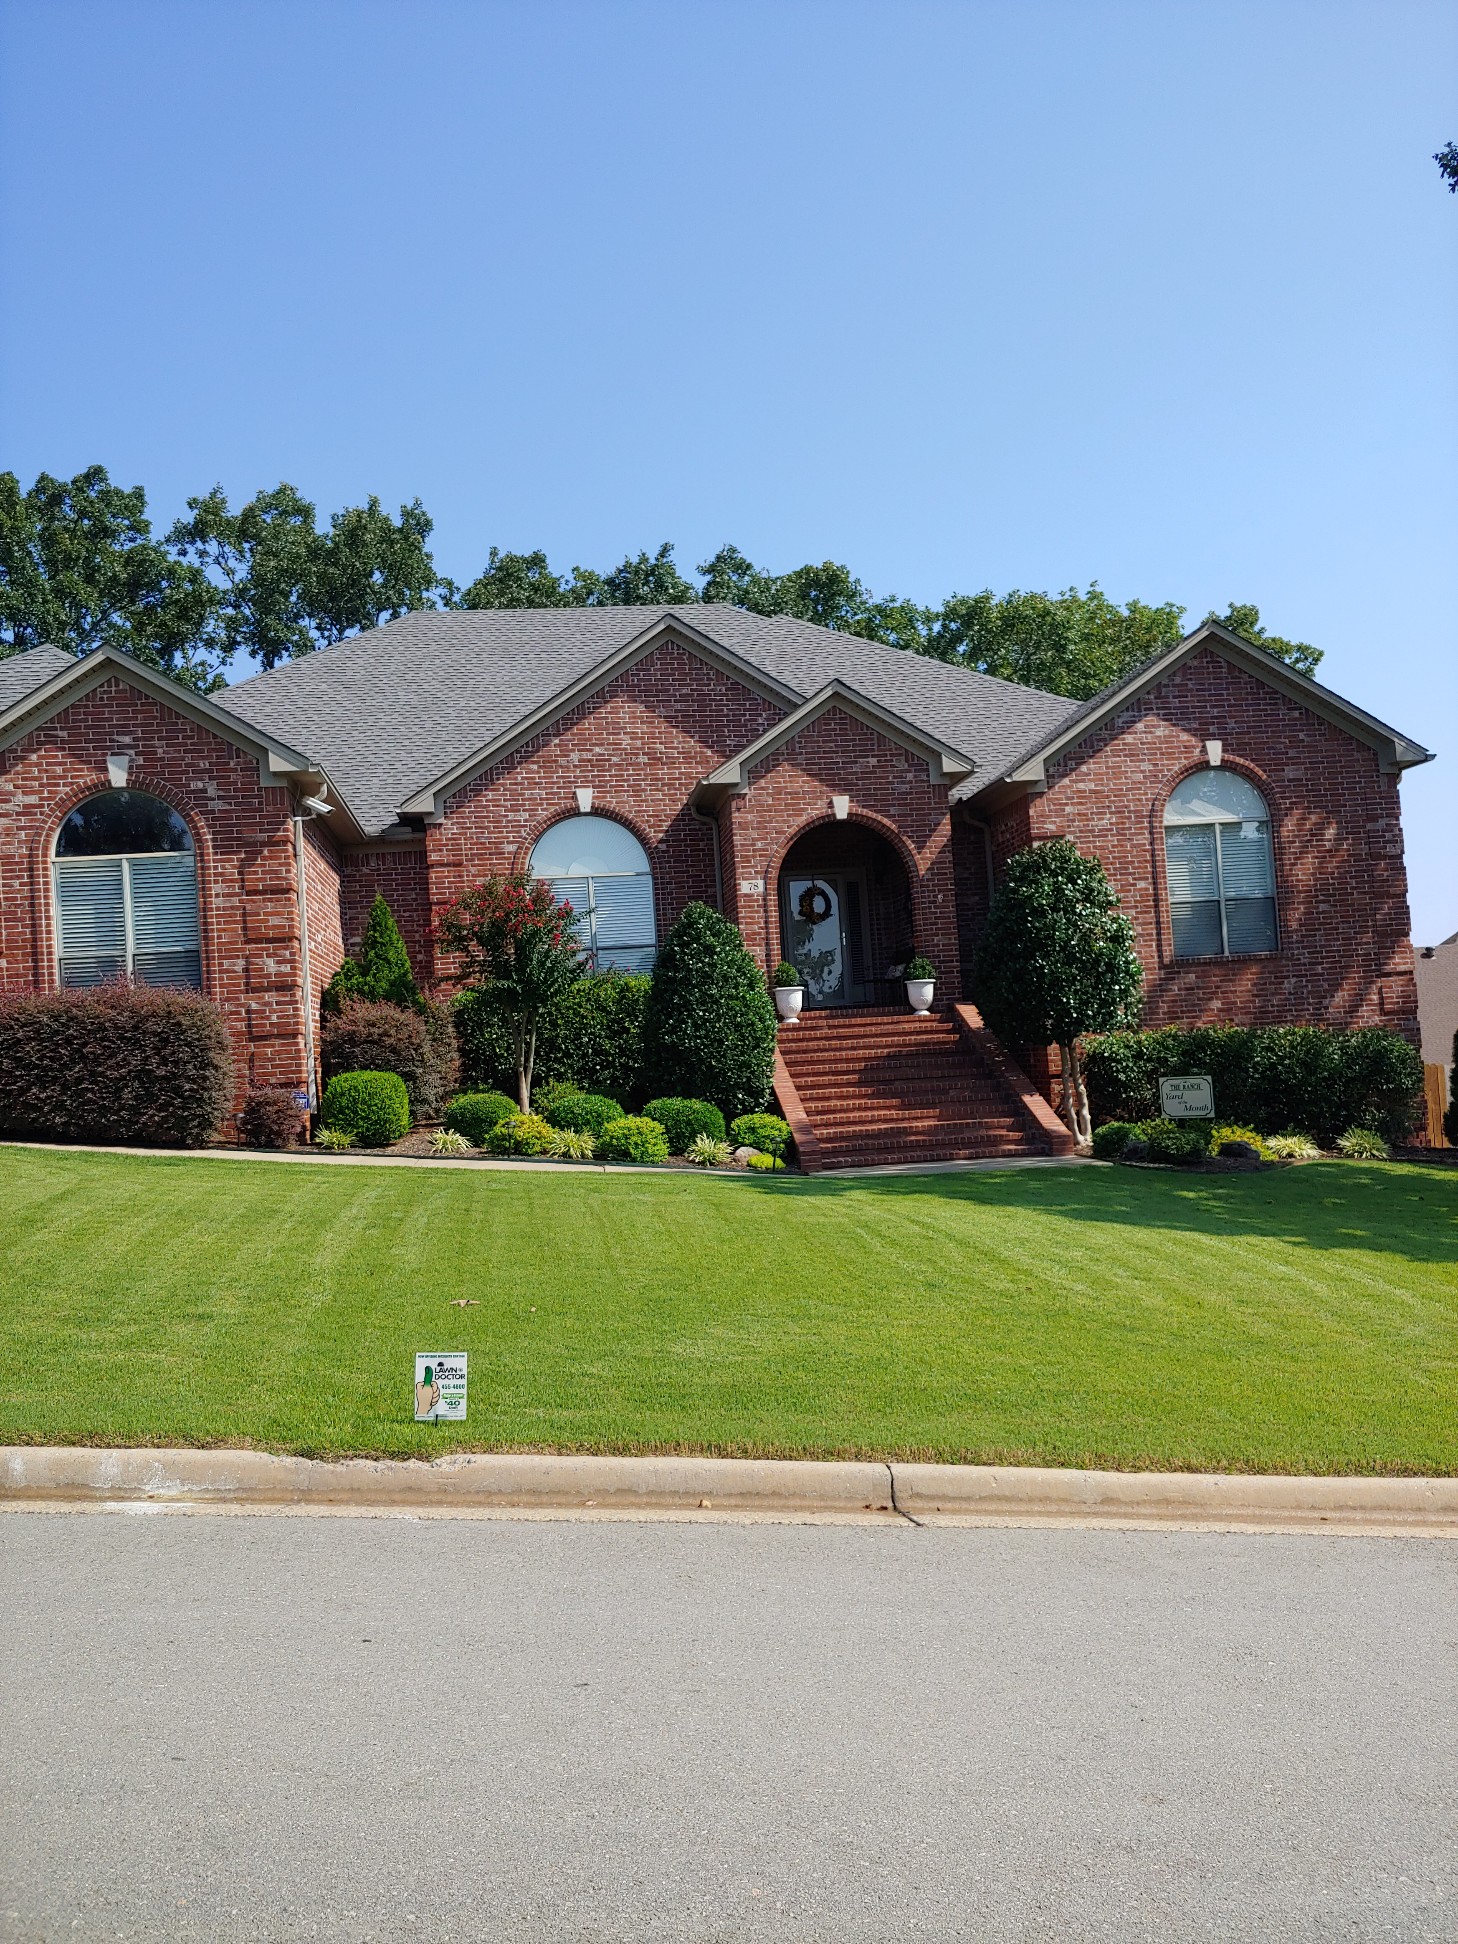 Large front yard with sign for yard of the month showing lawn services in Little Rock, AR